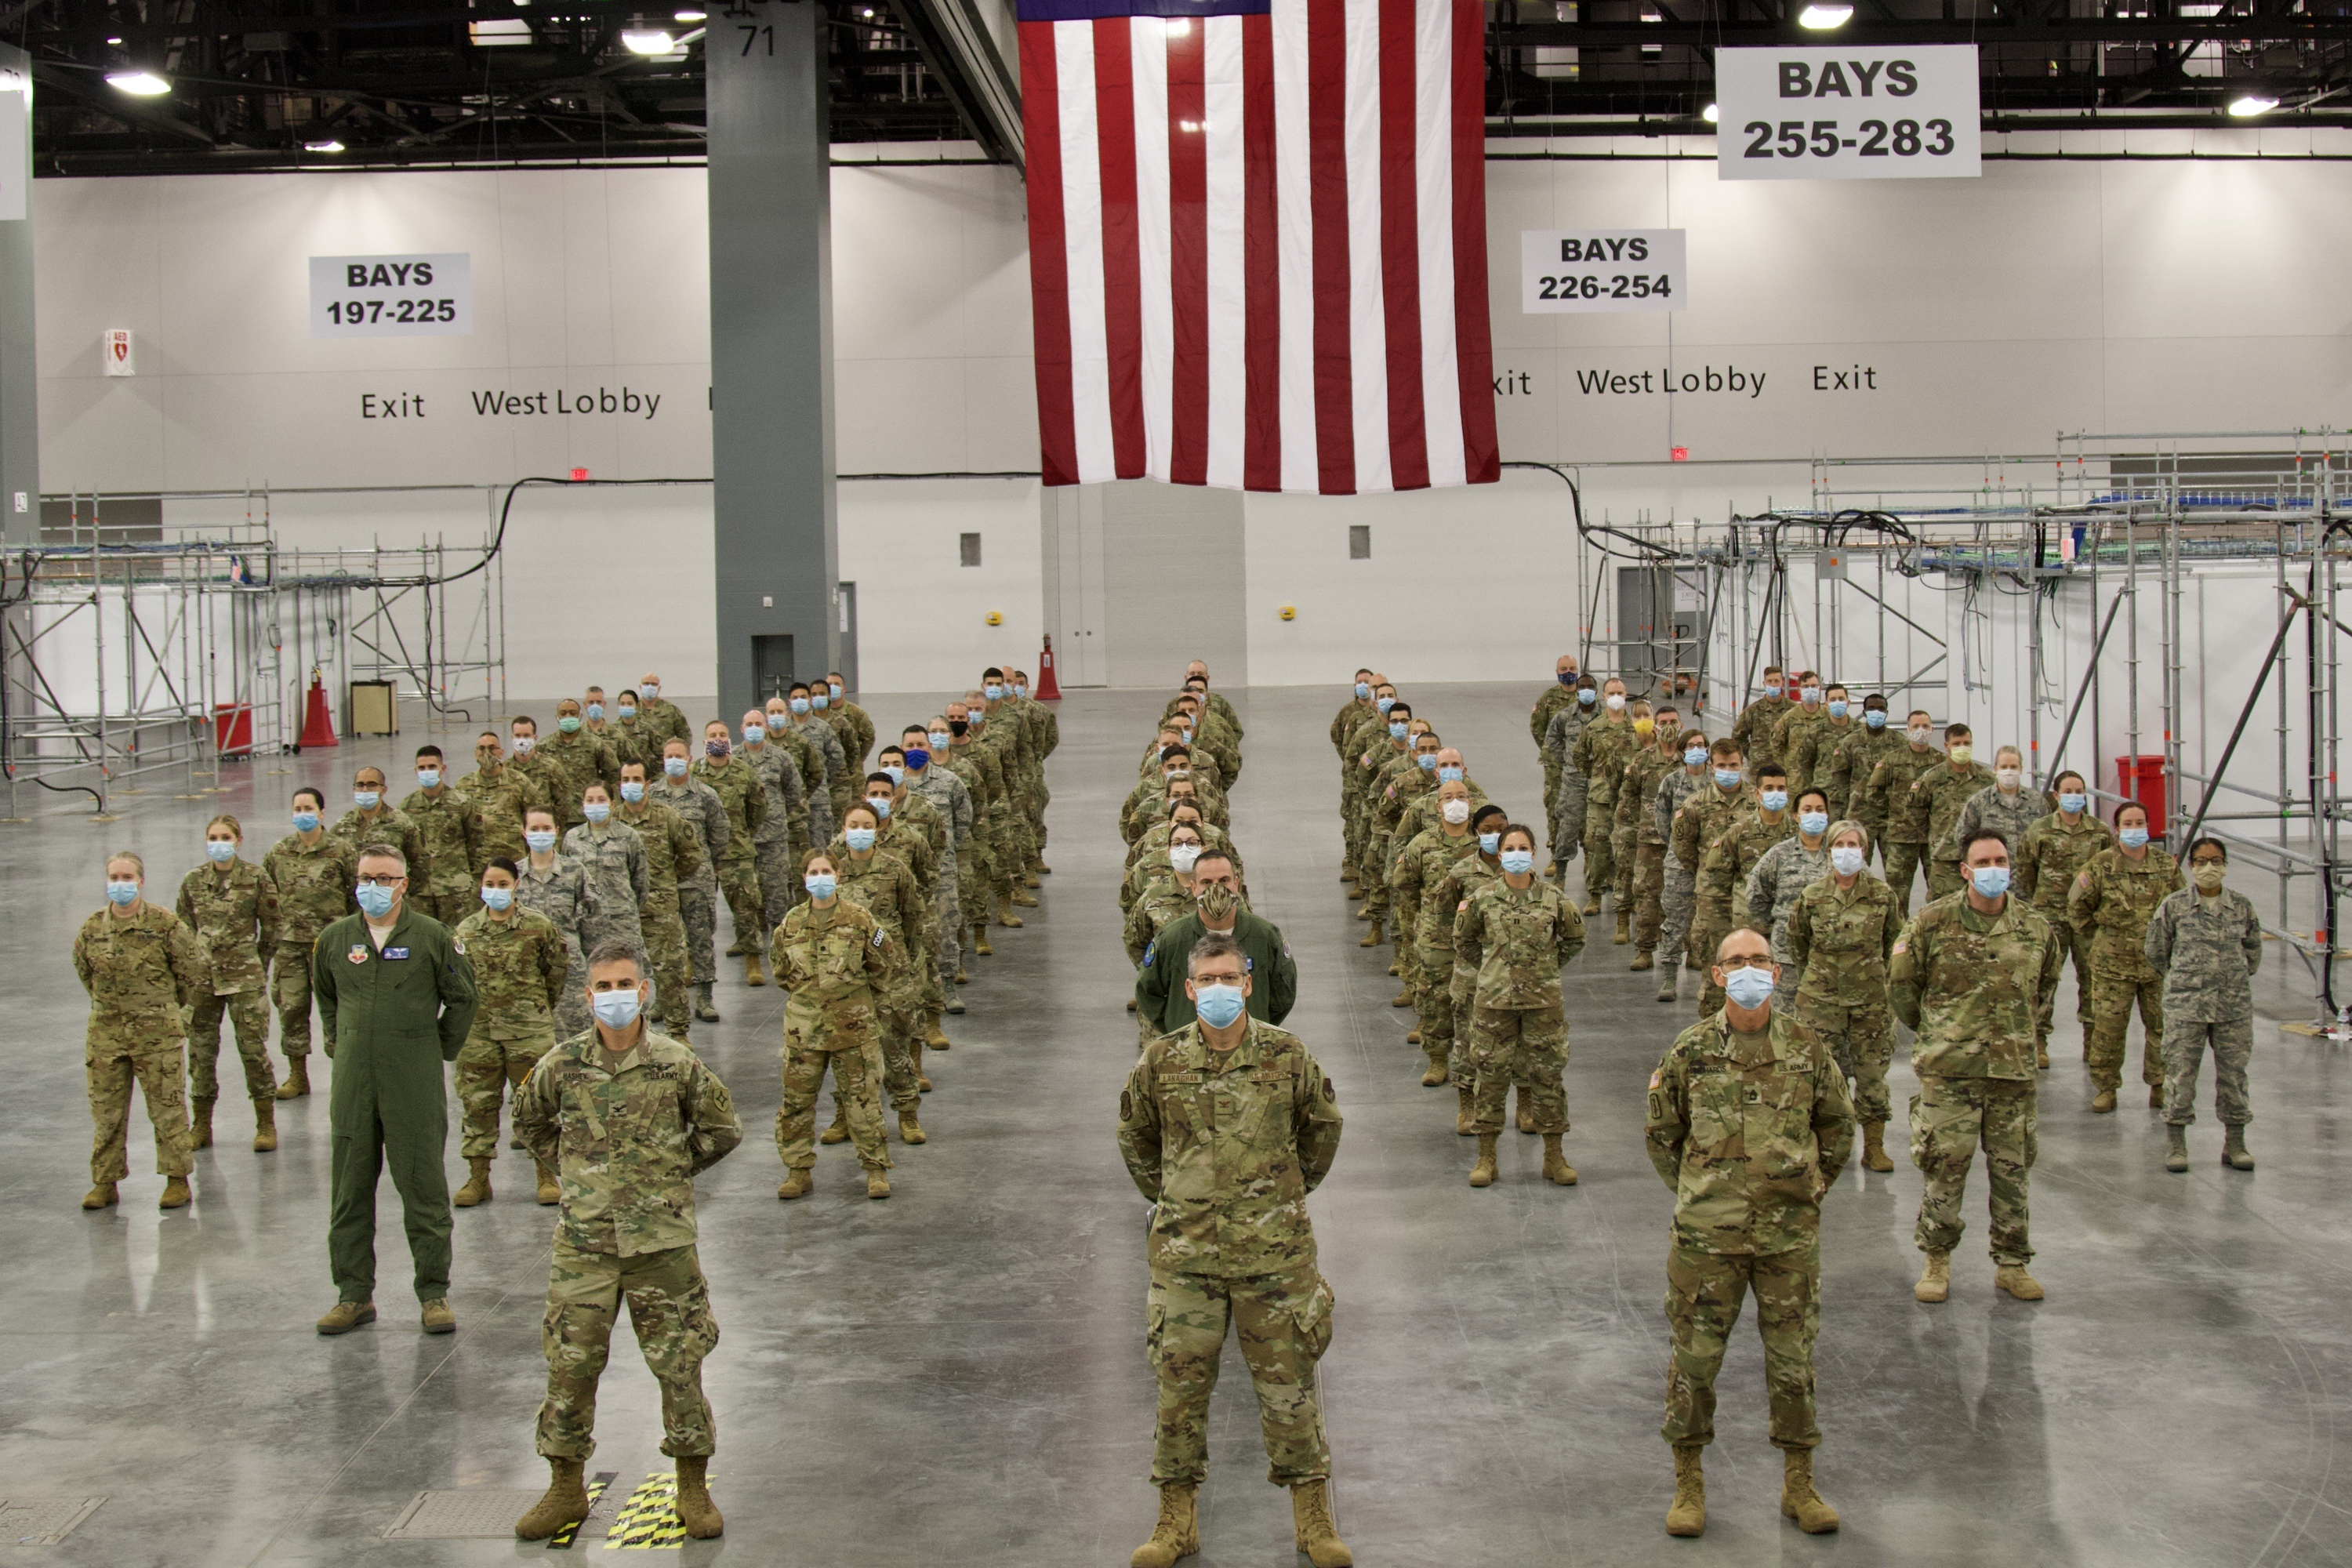 ActiveDuty Air Force Teams Deploy to Texas as Fort Bliss Declares